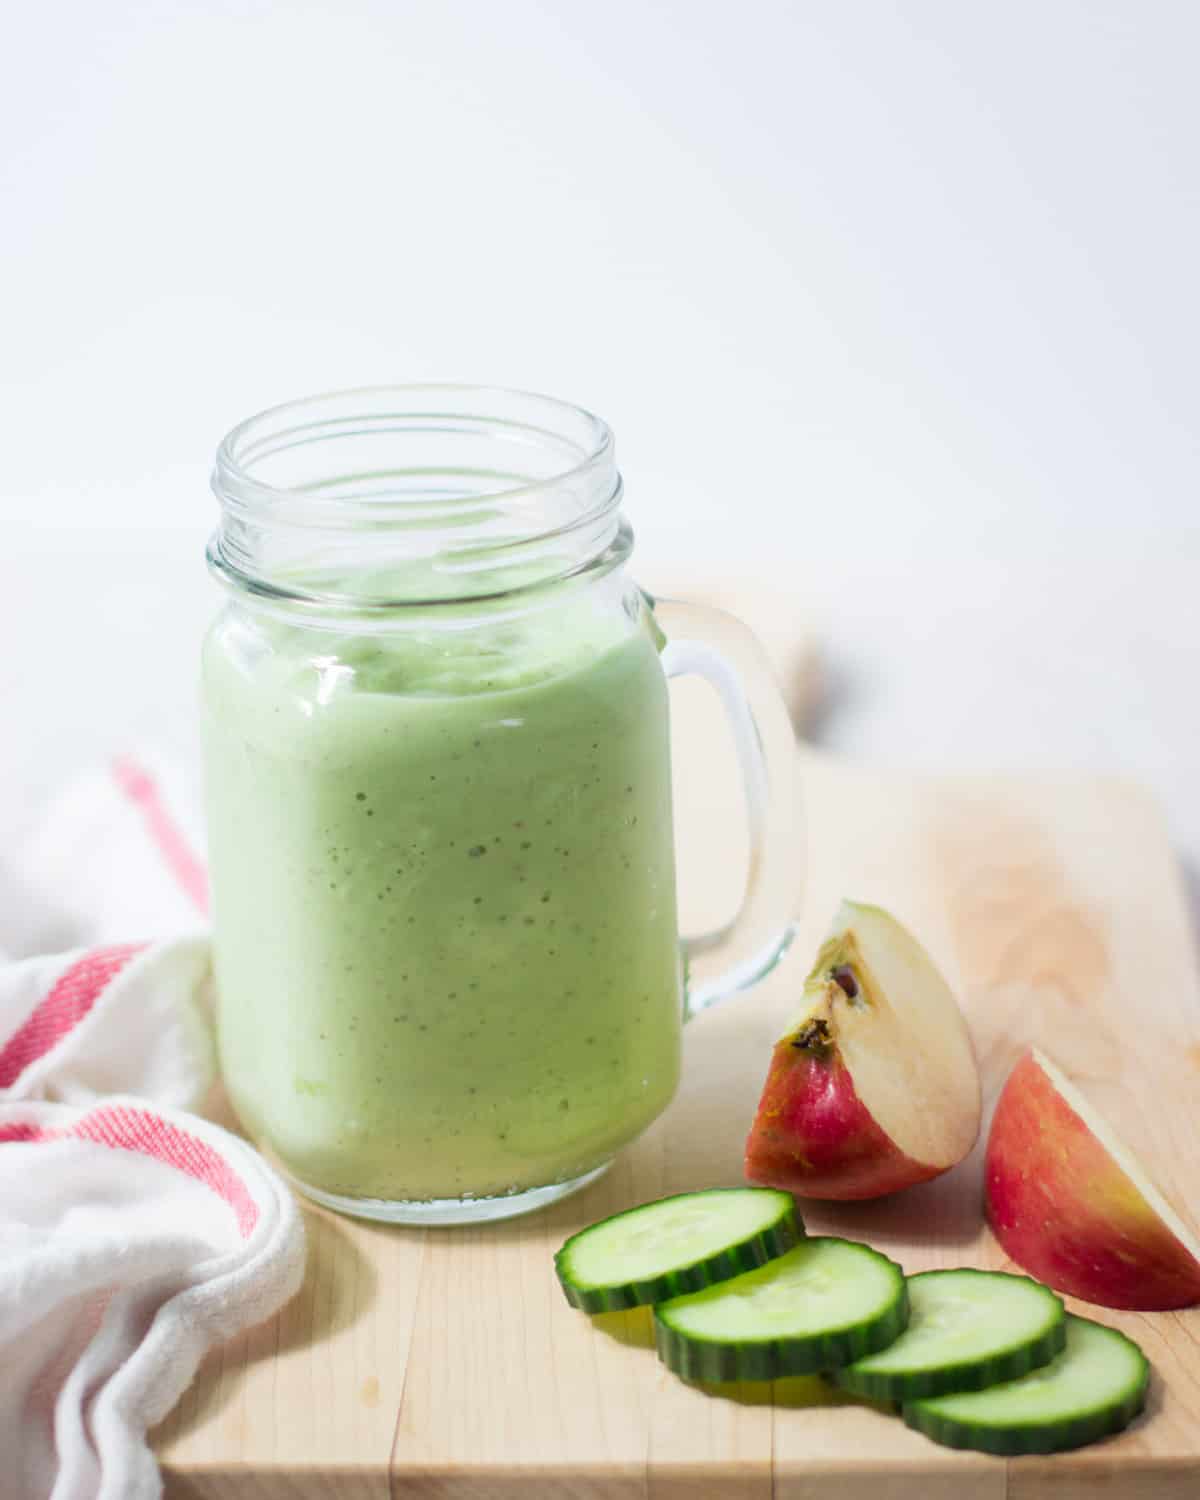 Cucumber smoothie in a glass jar with sliced cucumber and apples on the side.